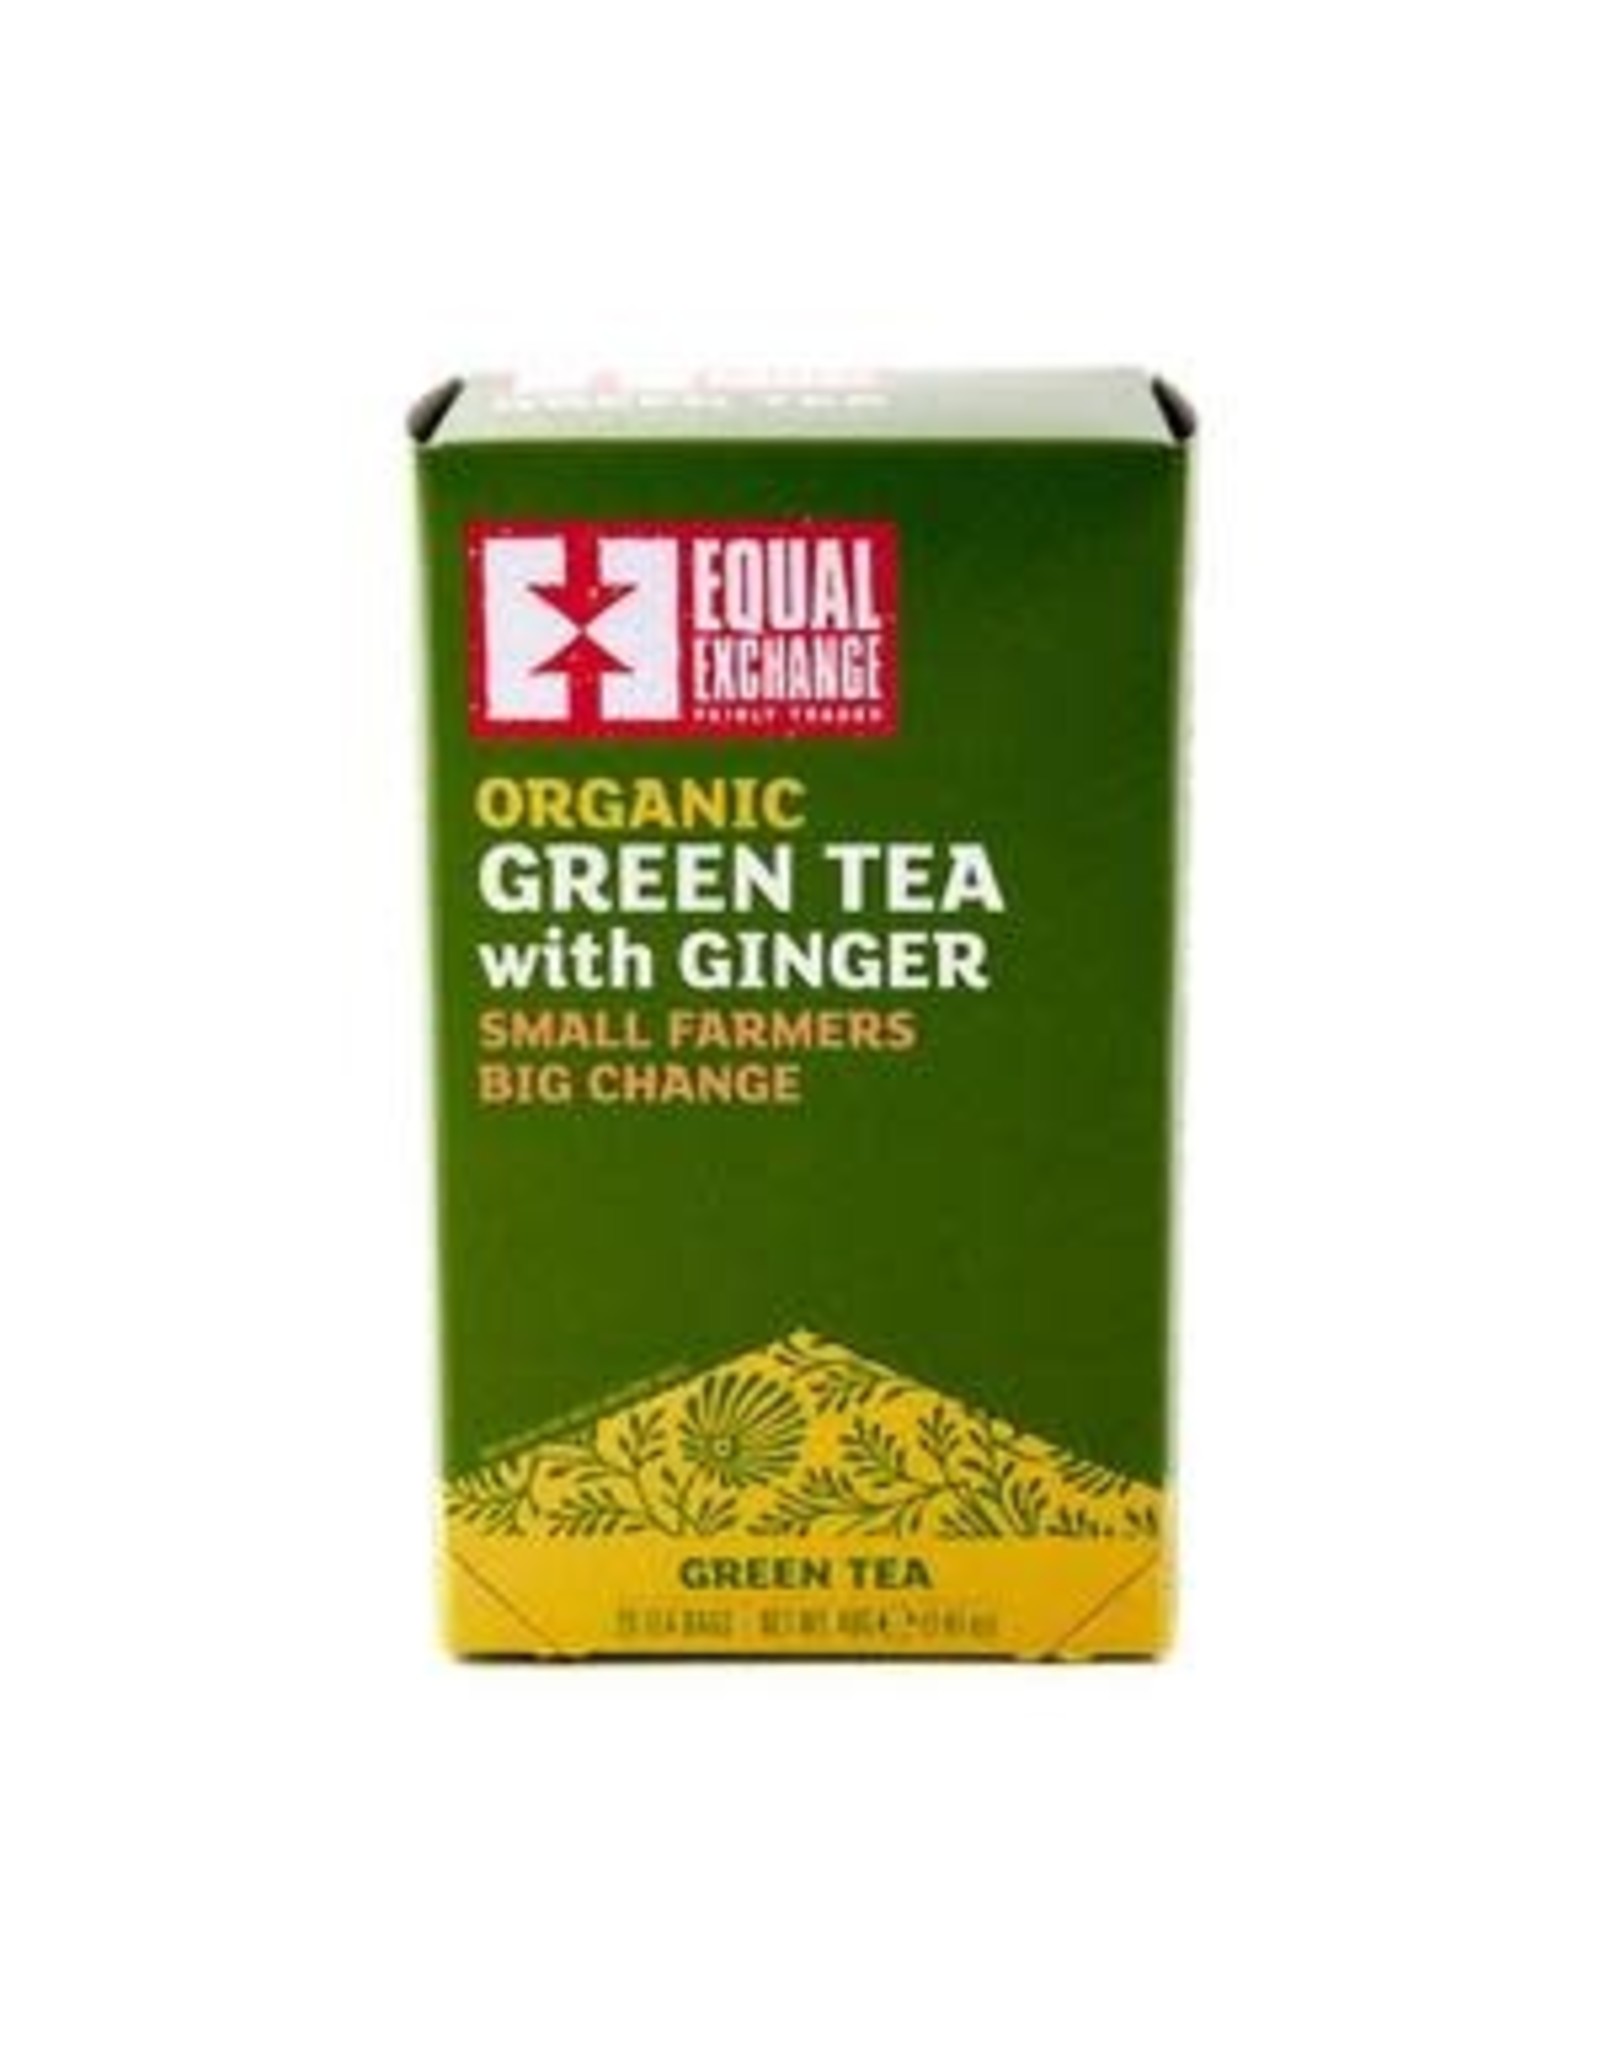 Organic Green Tea with Ginger, India